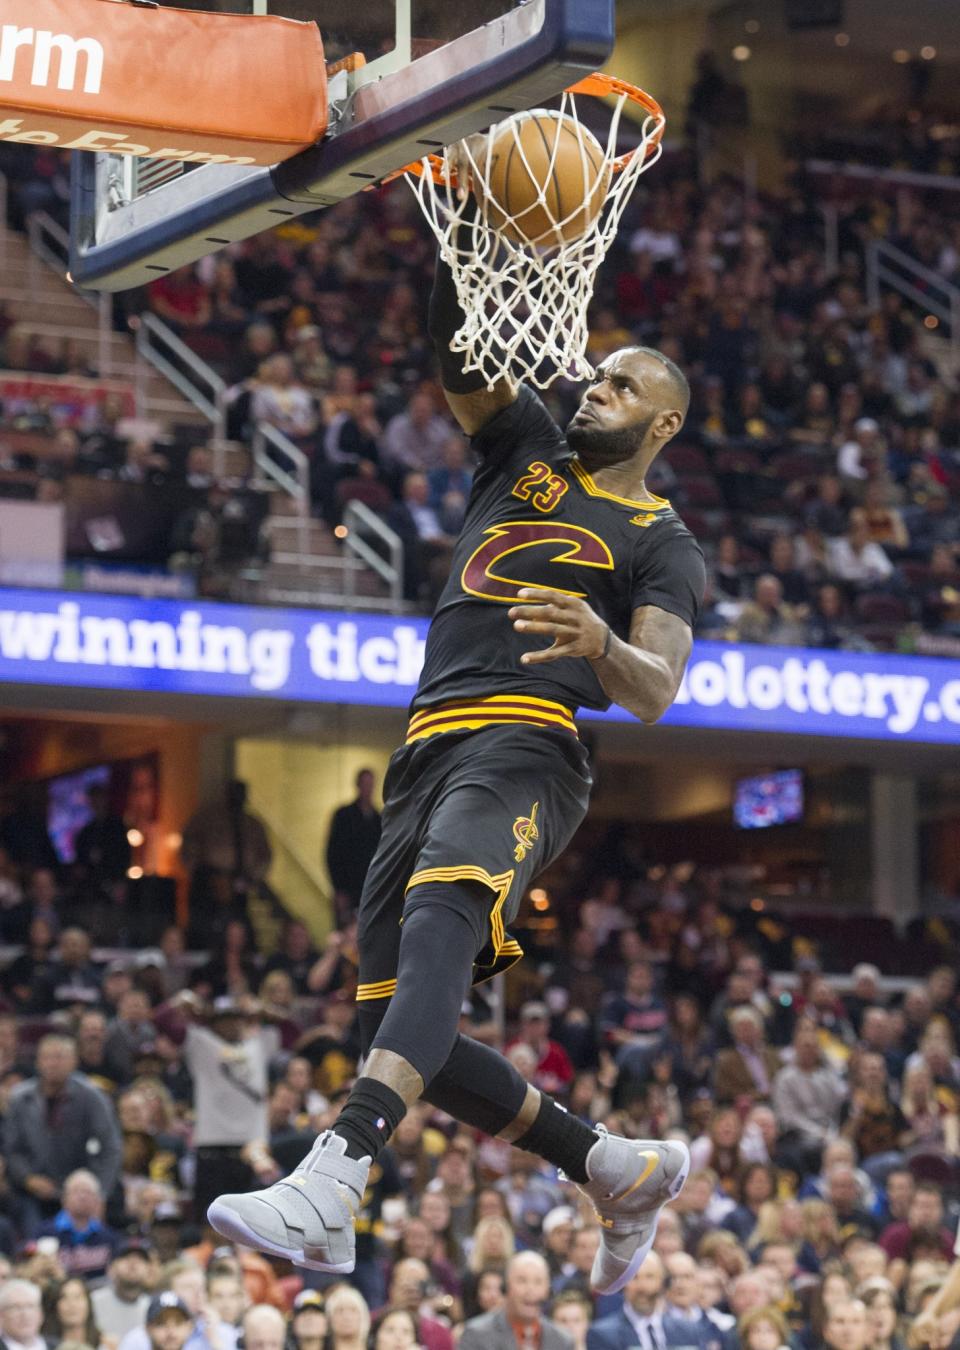 LeBron James let the Knicks know early in the third quarter he was done messing around. (AP)